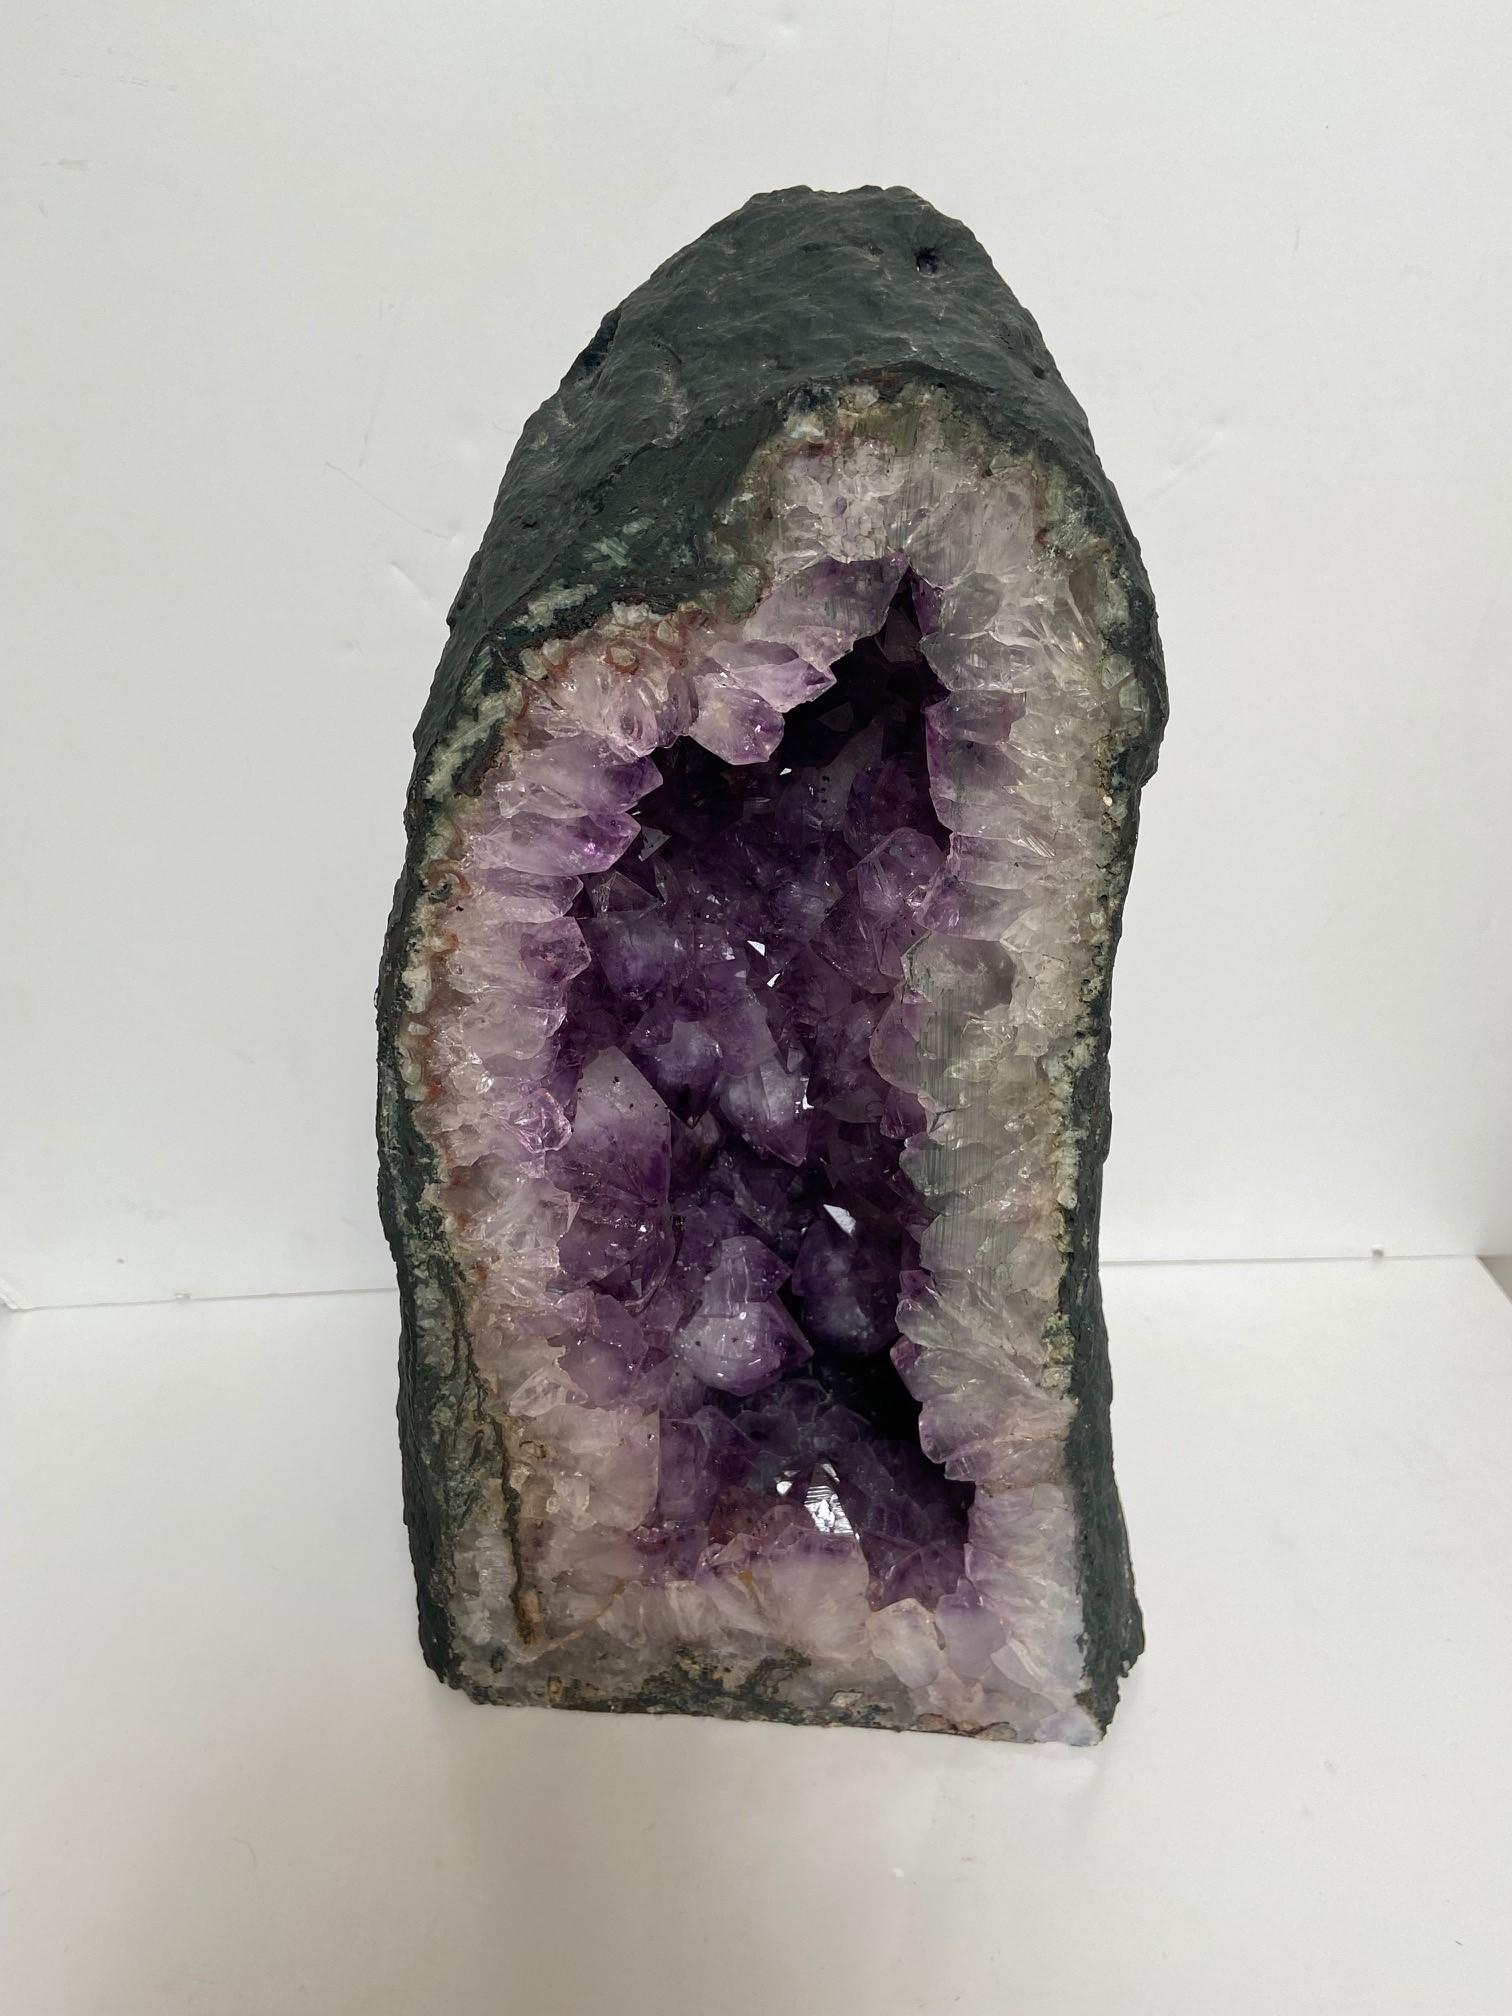 Amethyst crystal cave a striking cut and polished amethyst quartz geode tall Mountainous form, the single polished cut showing deep vibrant purple amethyst crystal.